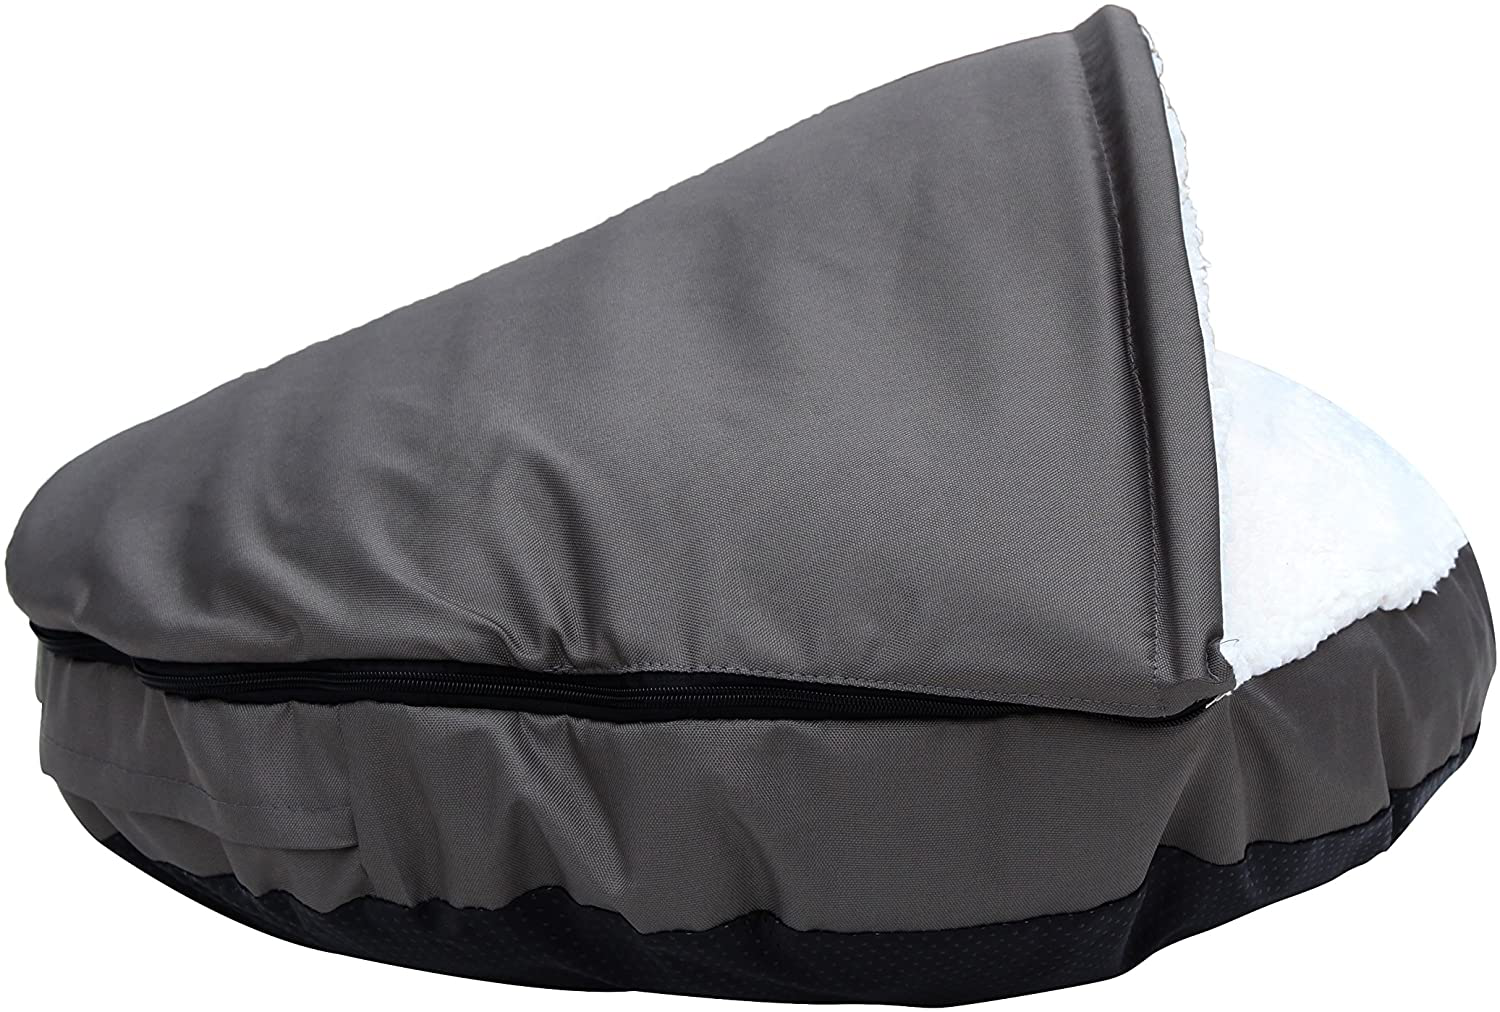 Long Rich Durable Oxford to Sherpa Pet Cave and round Pet Bed, 25", with Removable Top and Insert, by Happycare Textiles